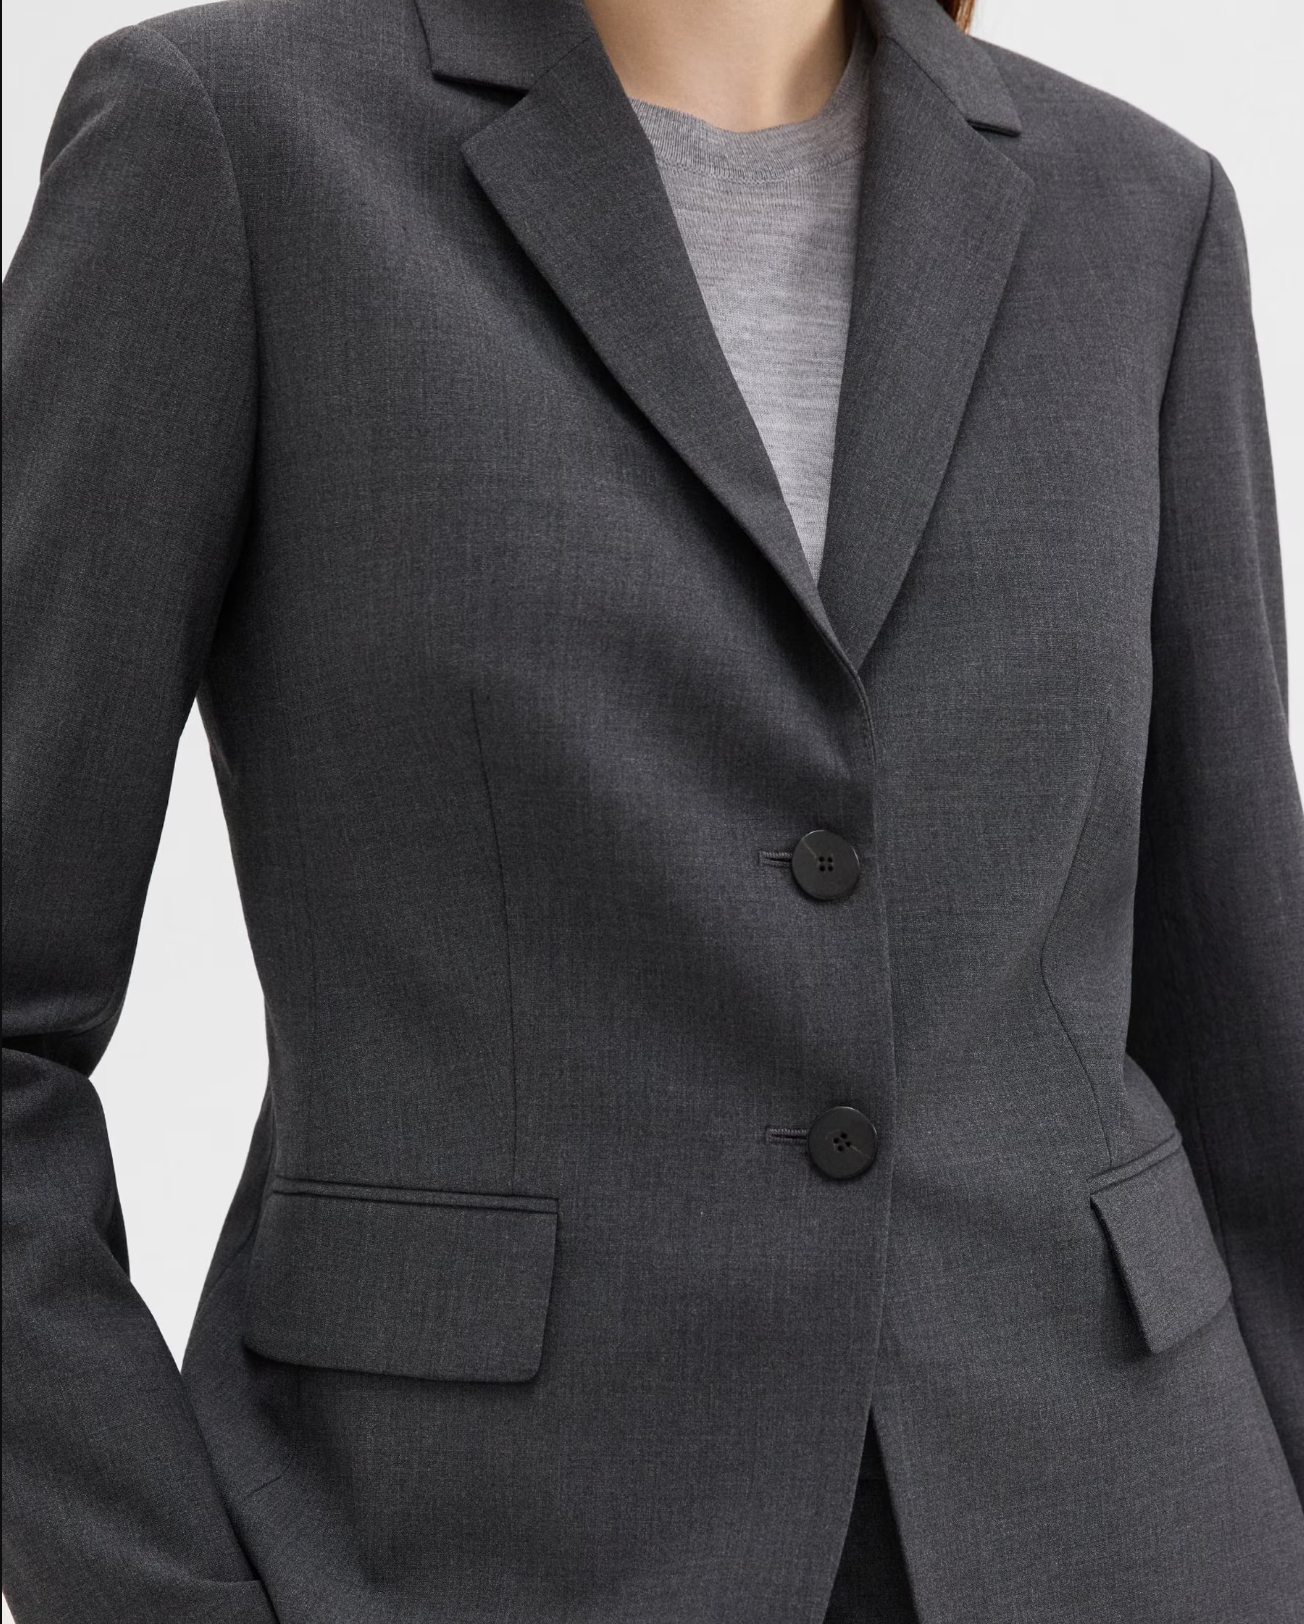 Women's professional suit in charcoal